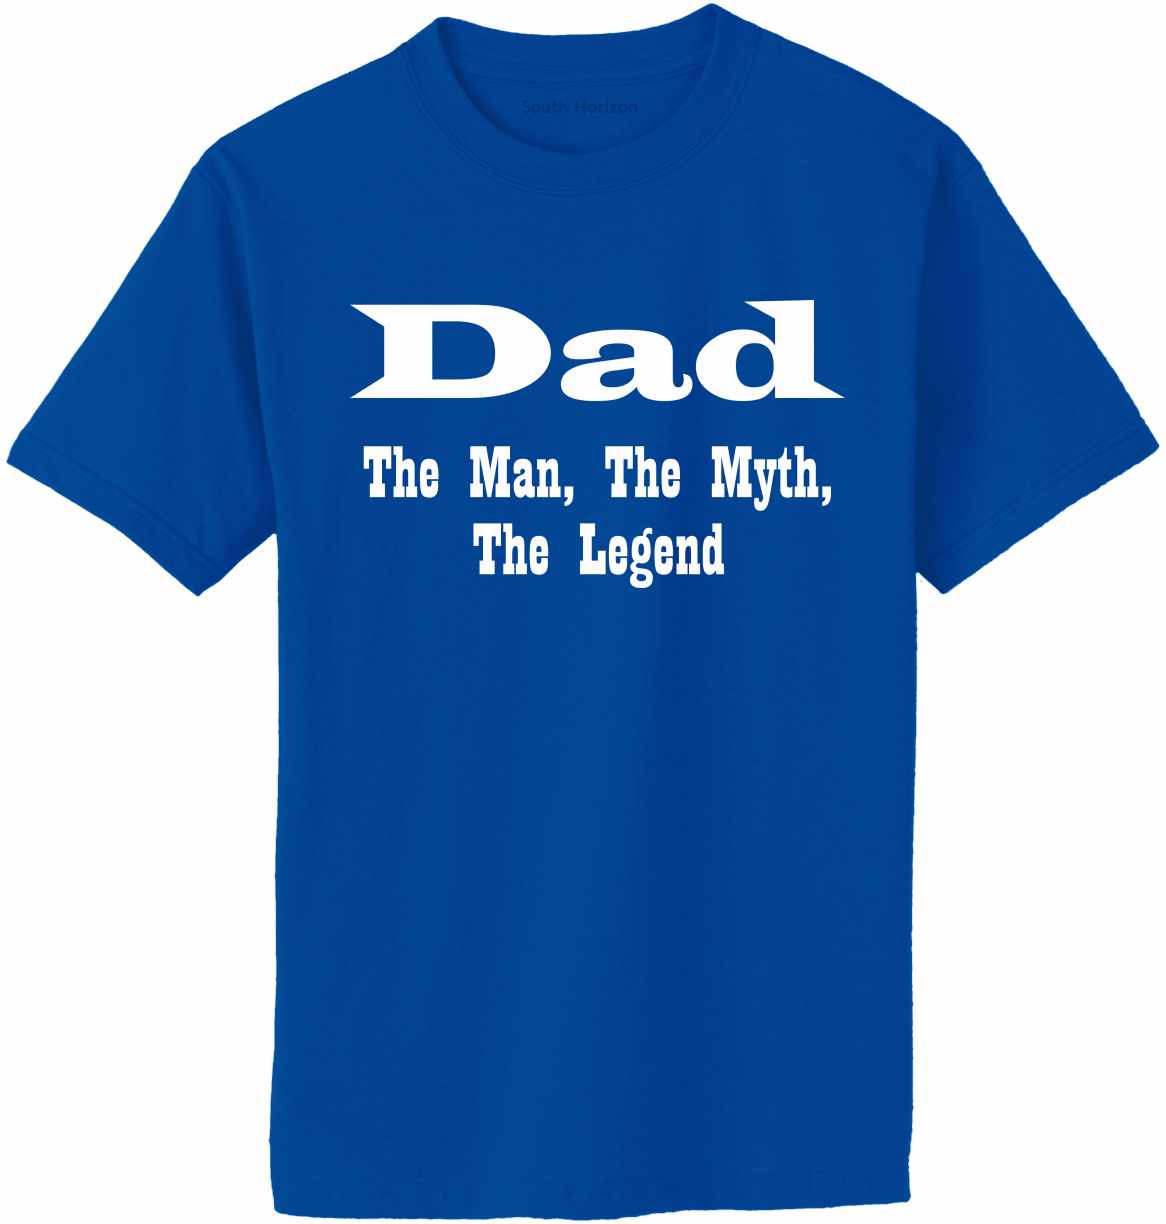 DAD, The Man, The Myth, The Legend Adult T-Shirt (#492-1)